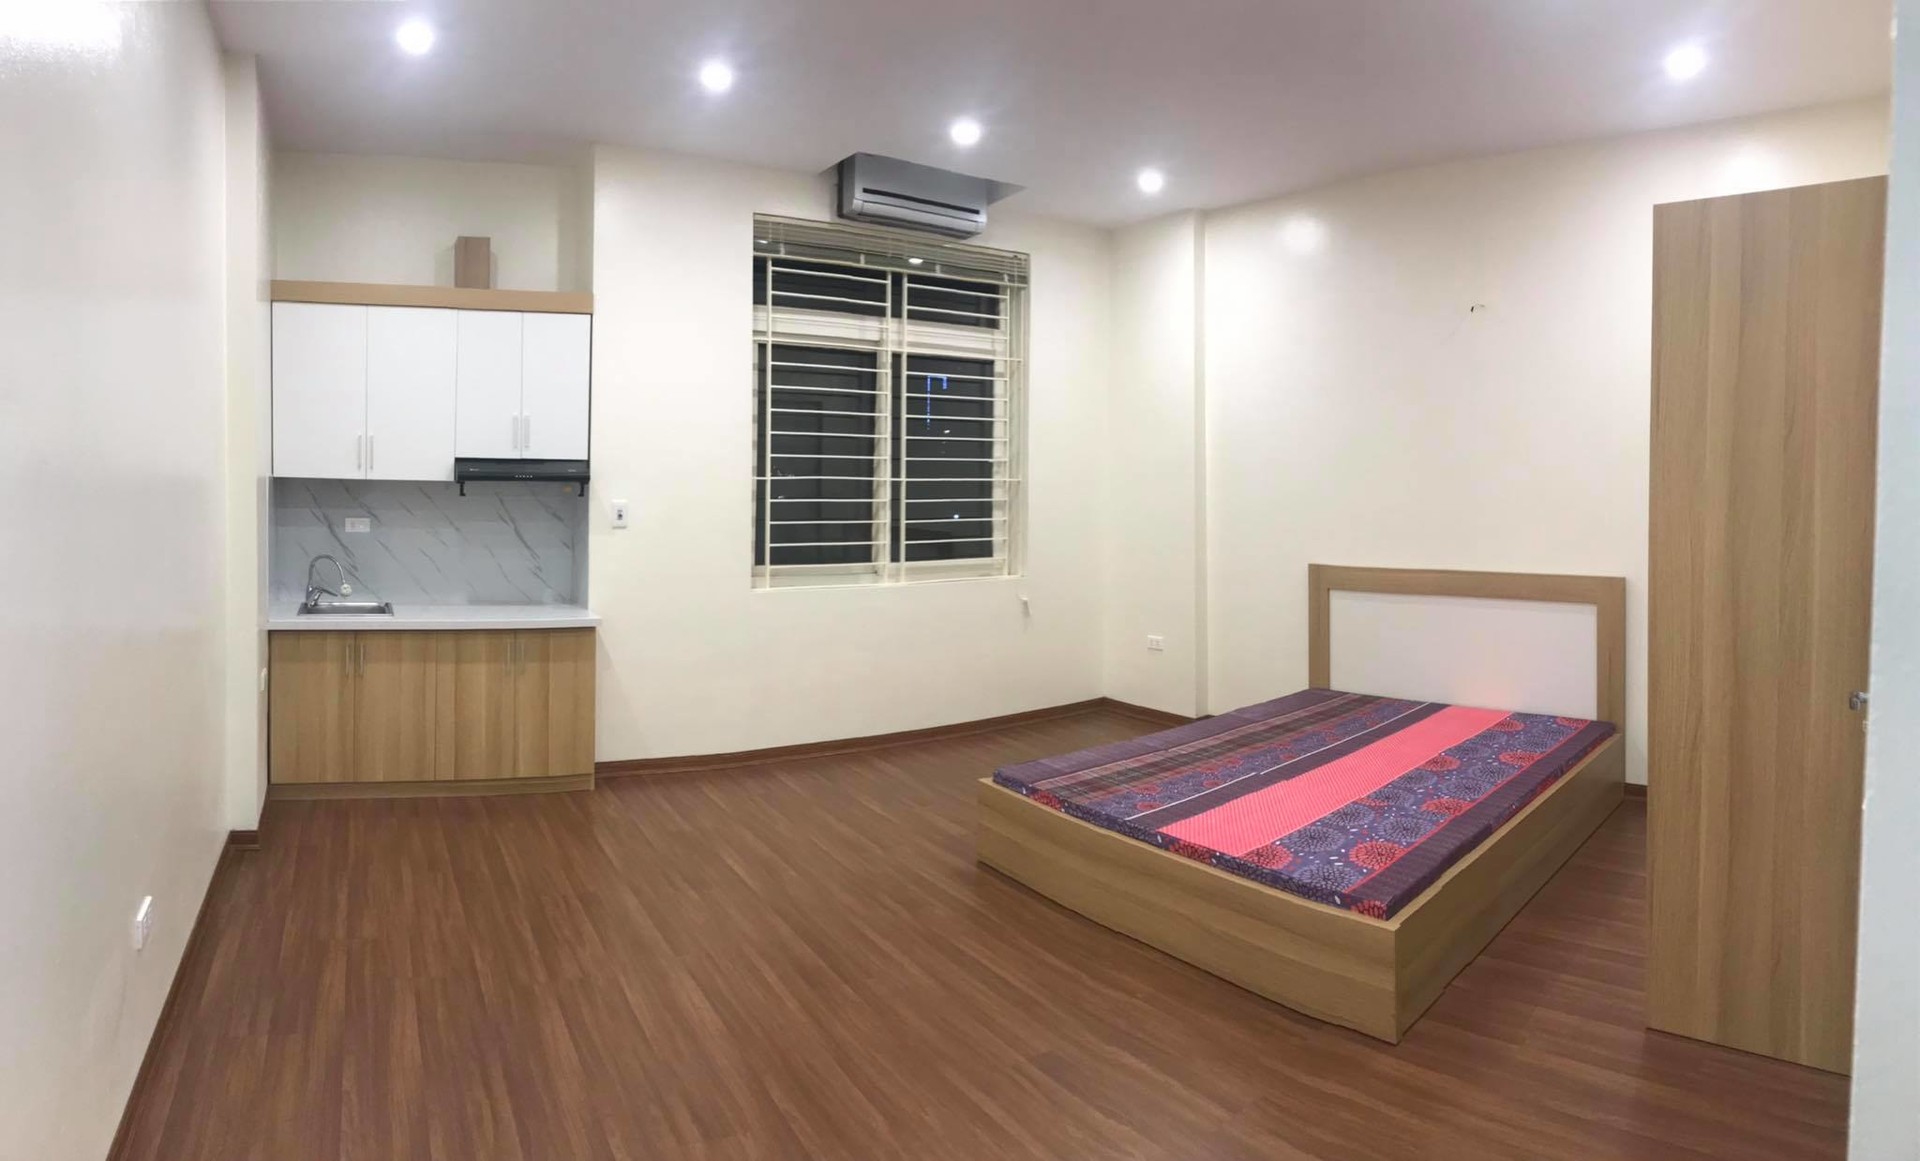 New room for rent - Luxury space in City center | Room for rent Hanoi